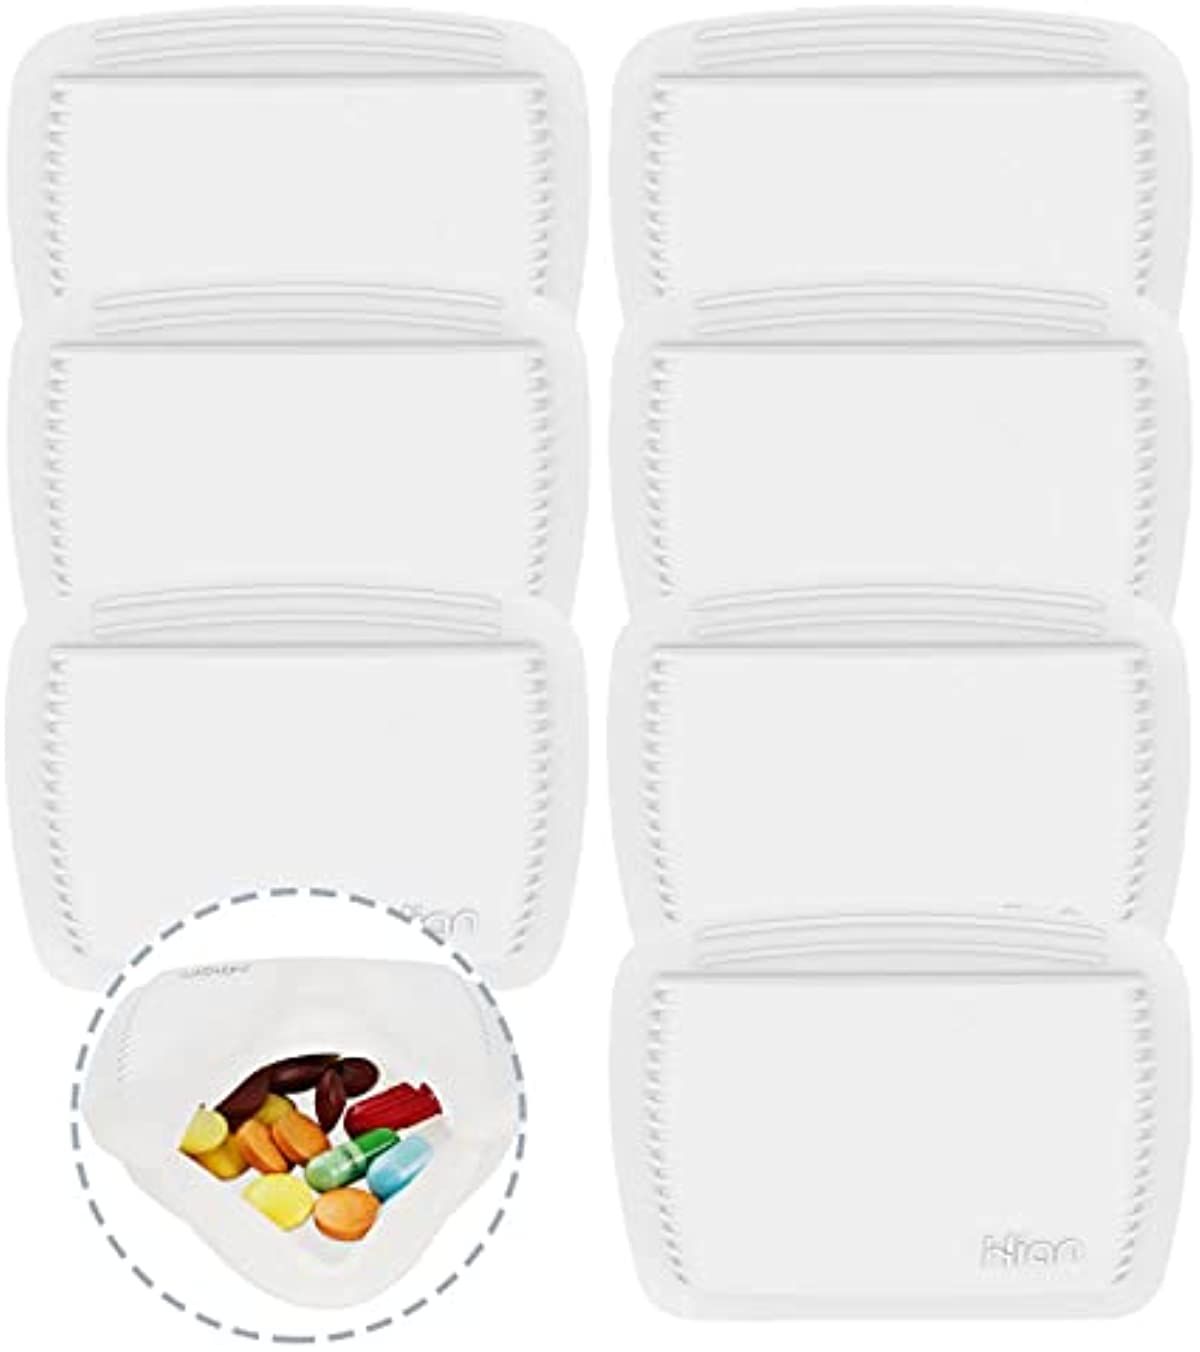 7 Pieces Small Pill Case Reusable Pocket Pill Case Portable Open Pill Pouch Silicone Small Pill Box for Organizing Medication, Pills, Vitamins, and Tablets for Travel (White)